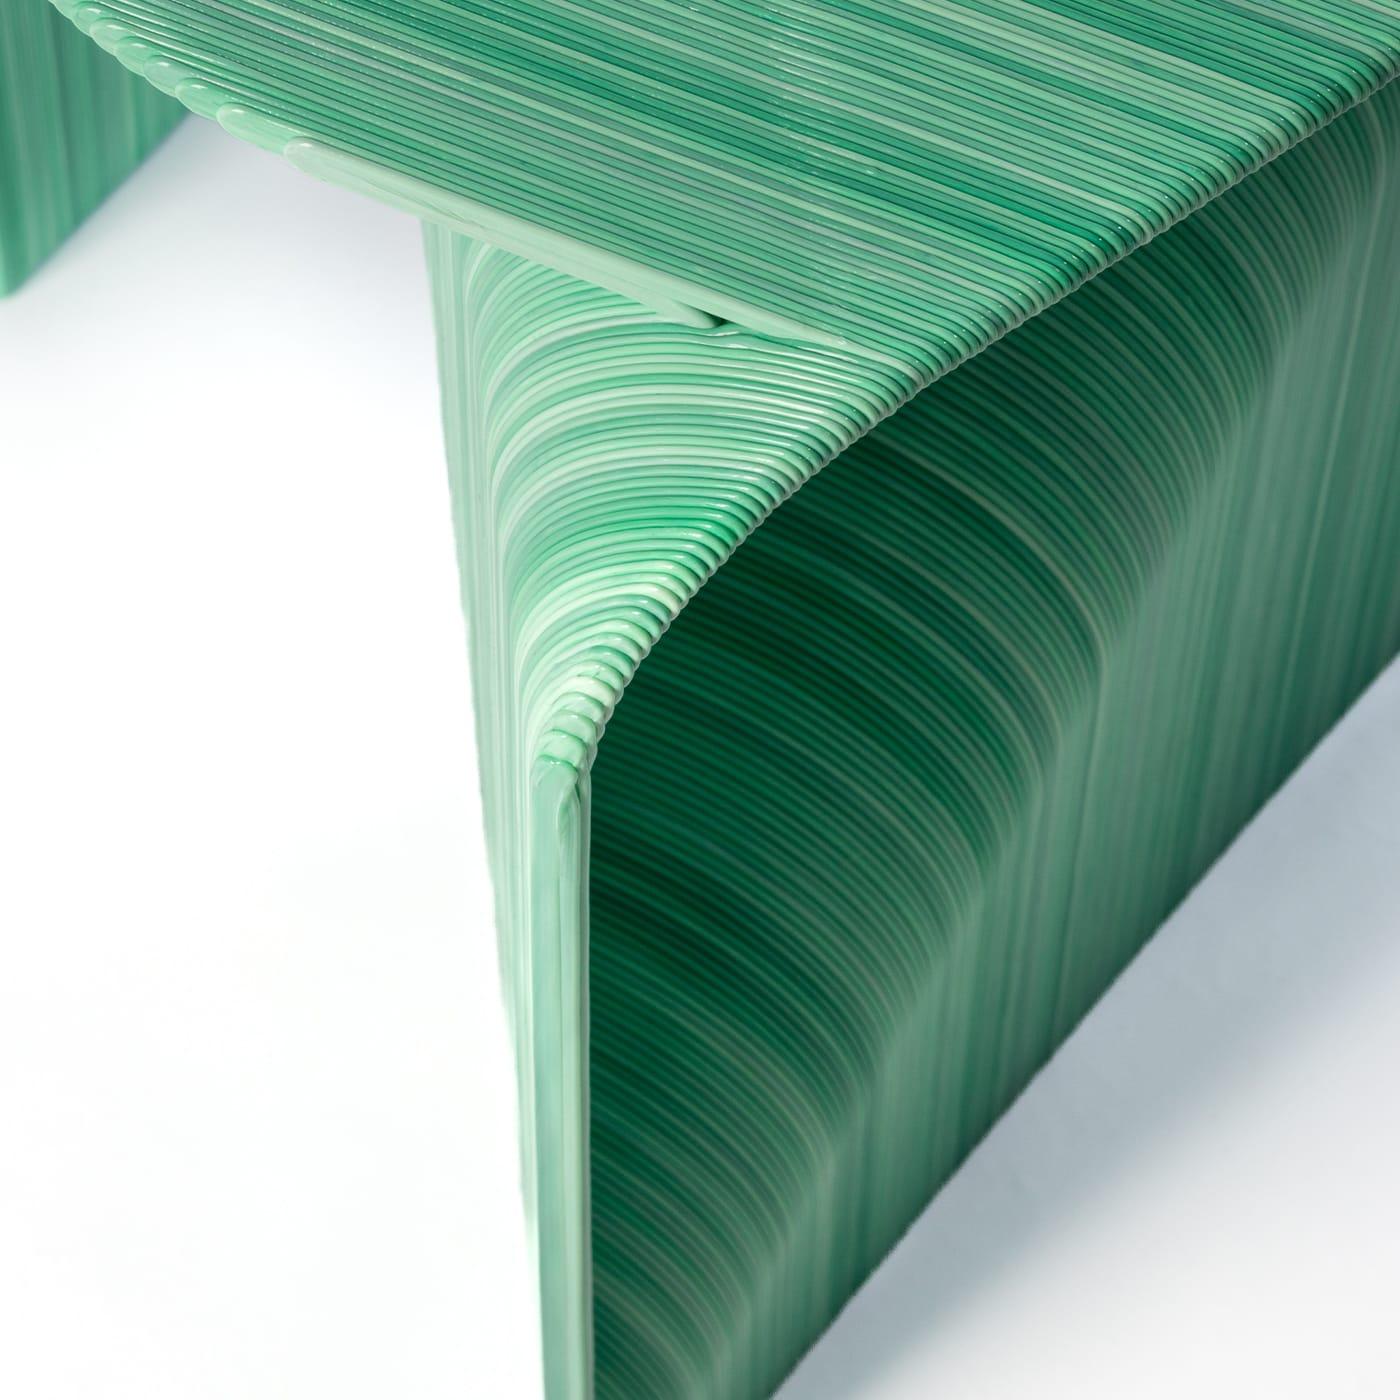 The Arzachena stool has a particular sculptural silhouette evoking the famous rock of the elephant beach. Its design is perfectly suited to living rooms and open space environments of all kinds. The unique combination of streaks of color with